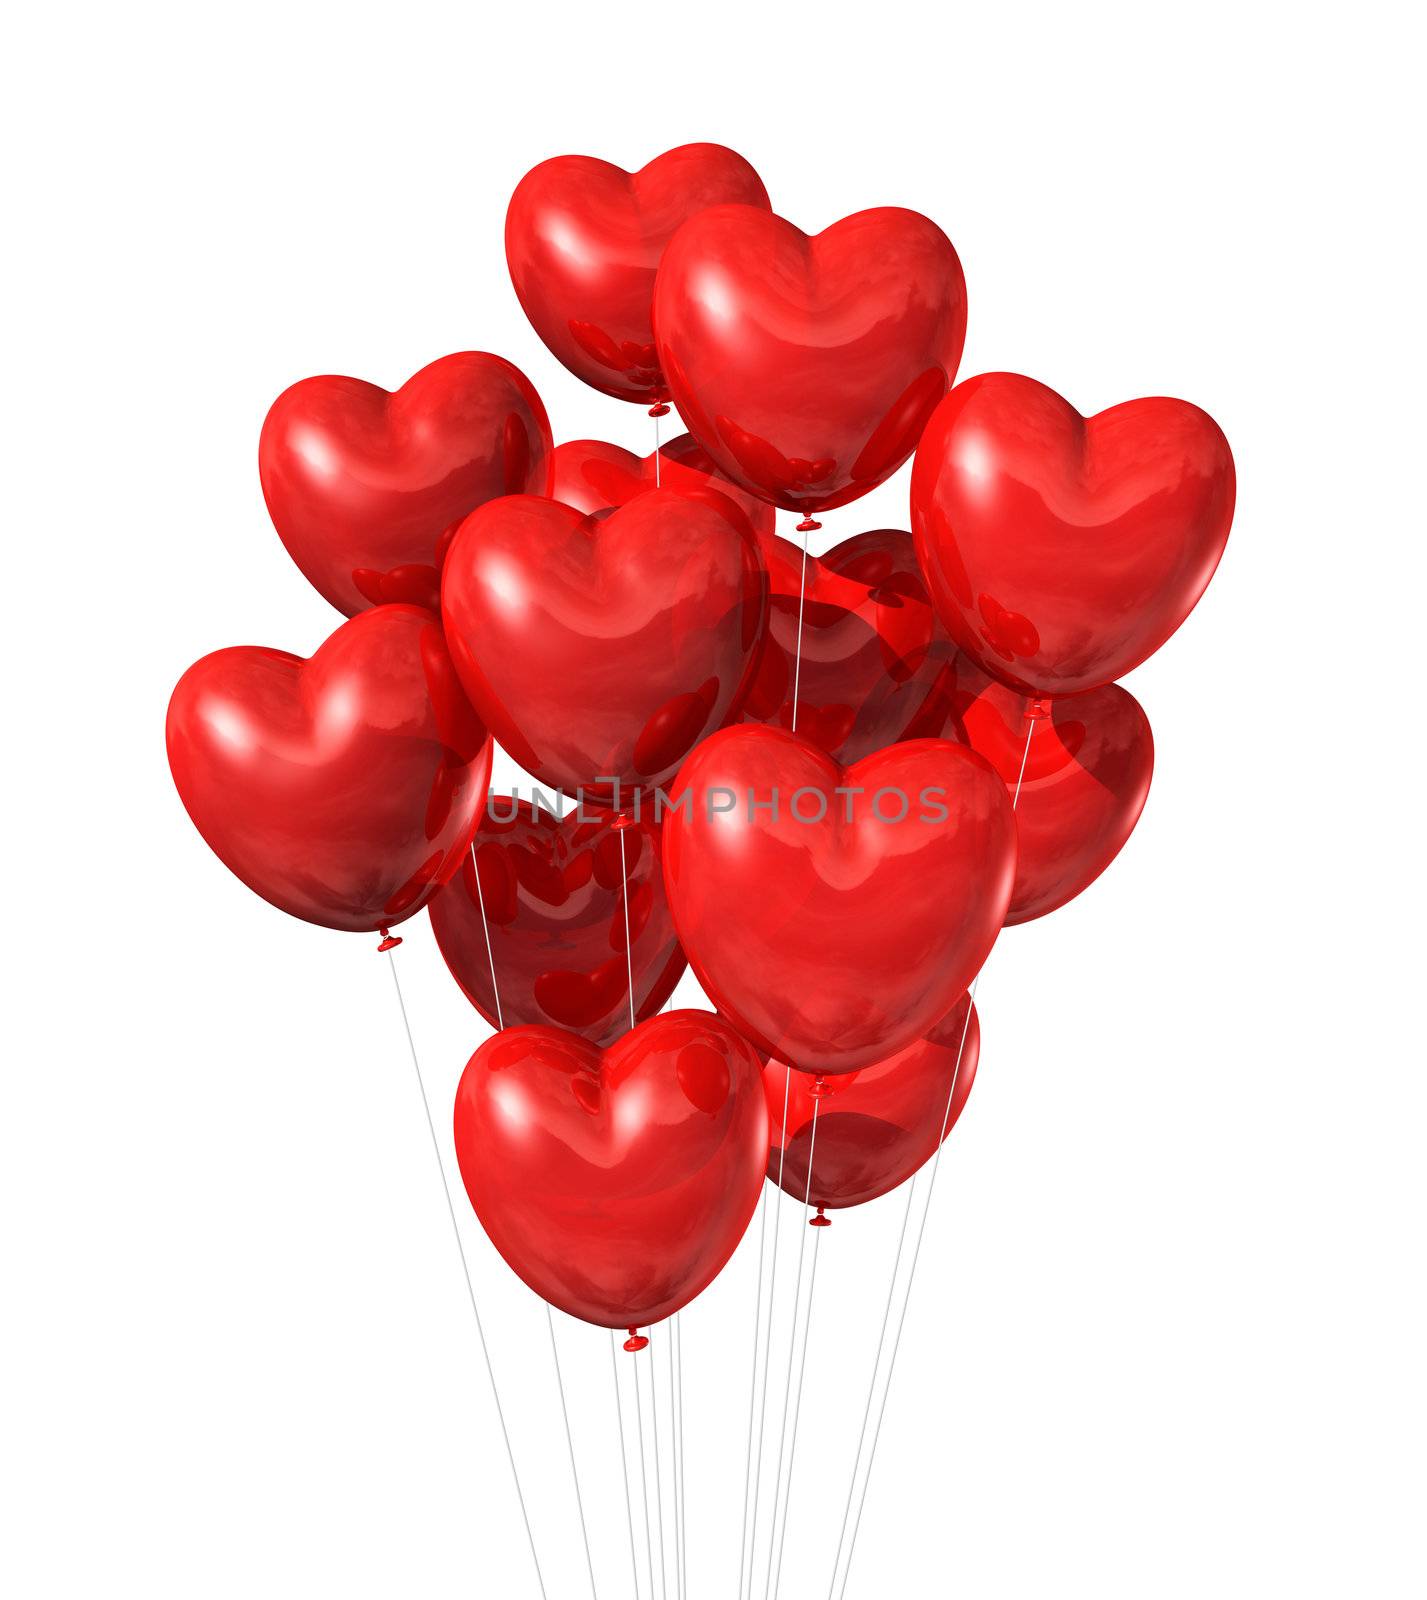 red heart shaped balloons isolated on white by daboost